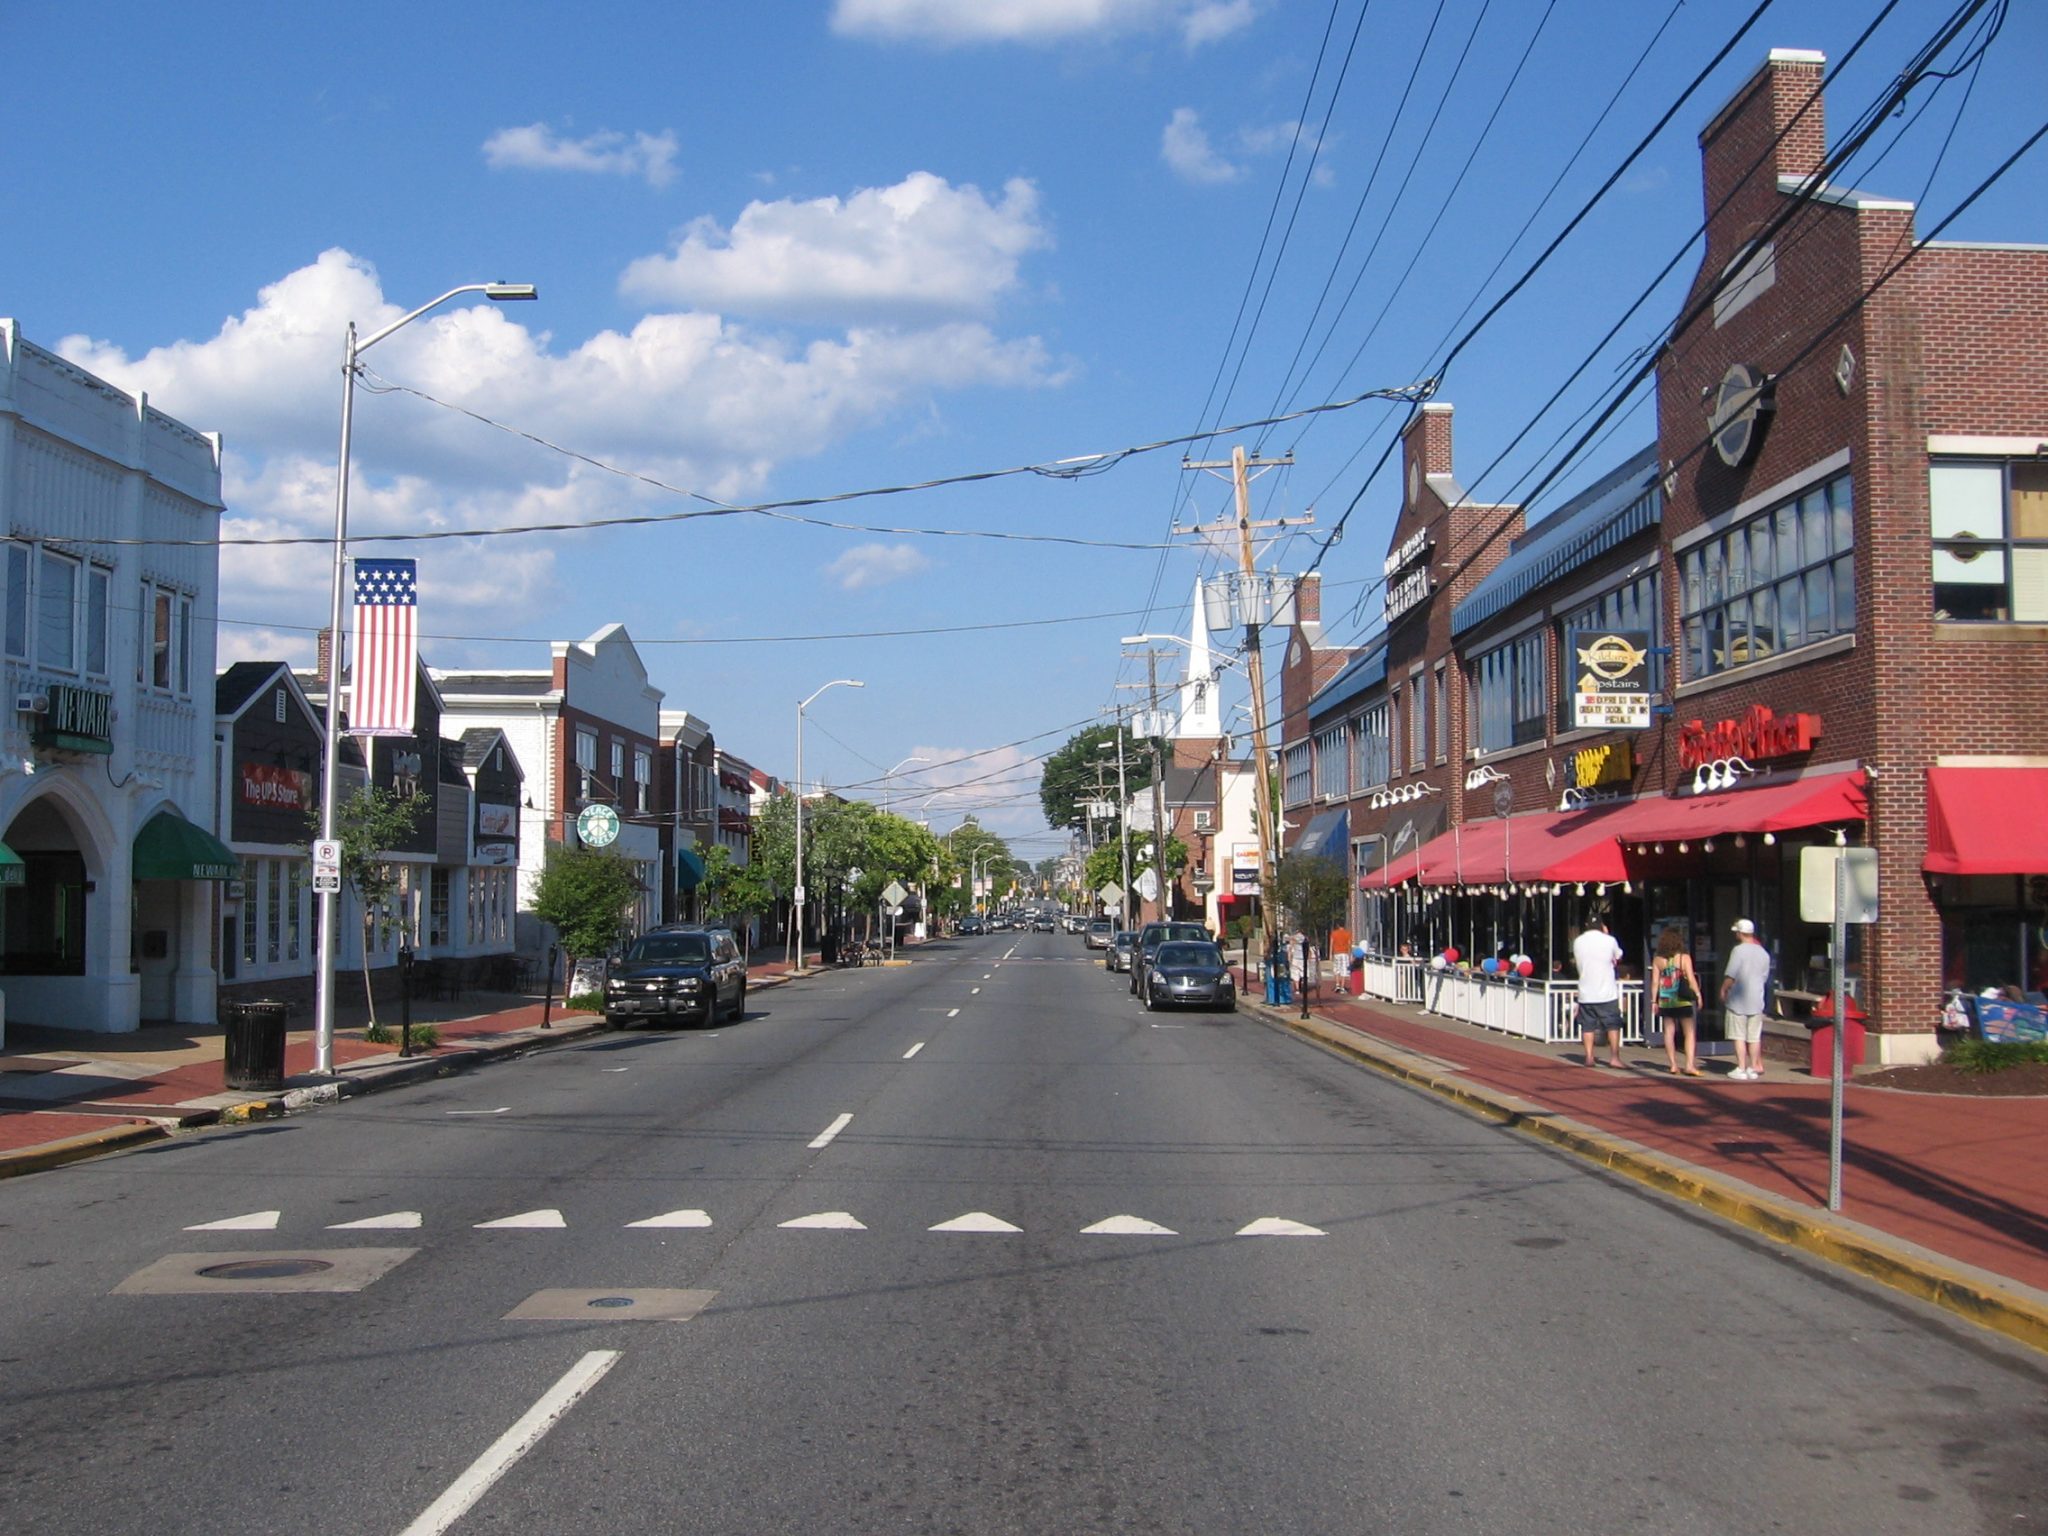 Eye-level view of a street and buildings in Newark, Delaware